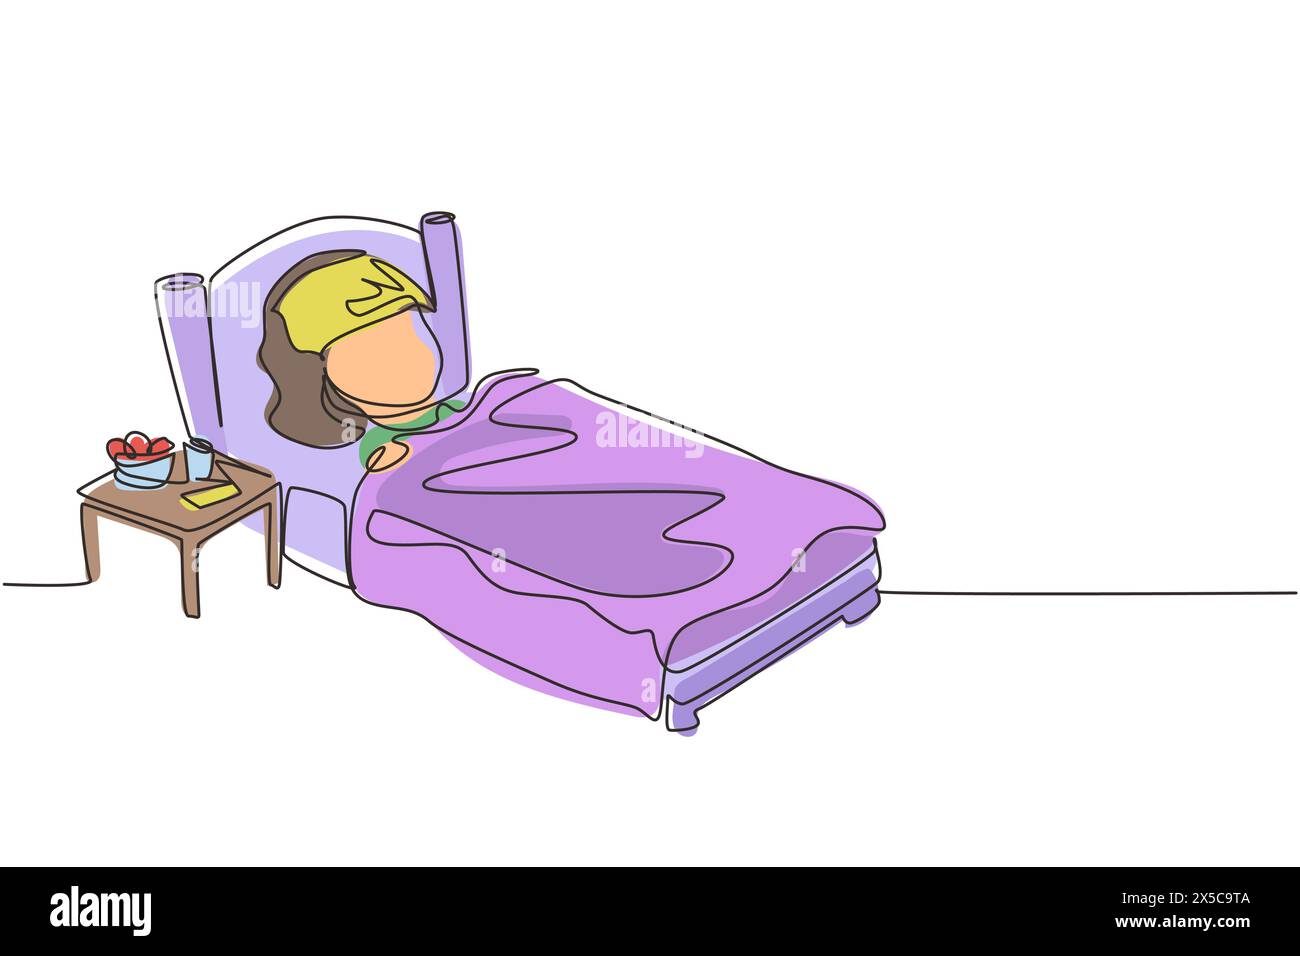 Single continuous line drawing sick girl with high fever. Child is sick with flu or coronavirus. Kid lying in bed feel so bad with fever. Healthcare s Stock Vector